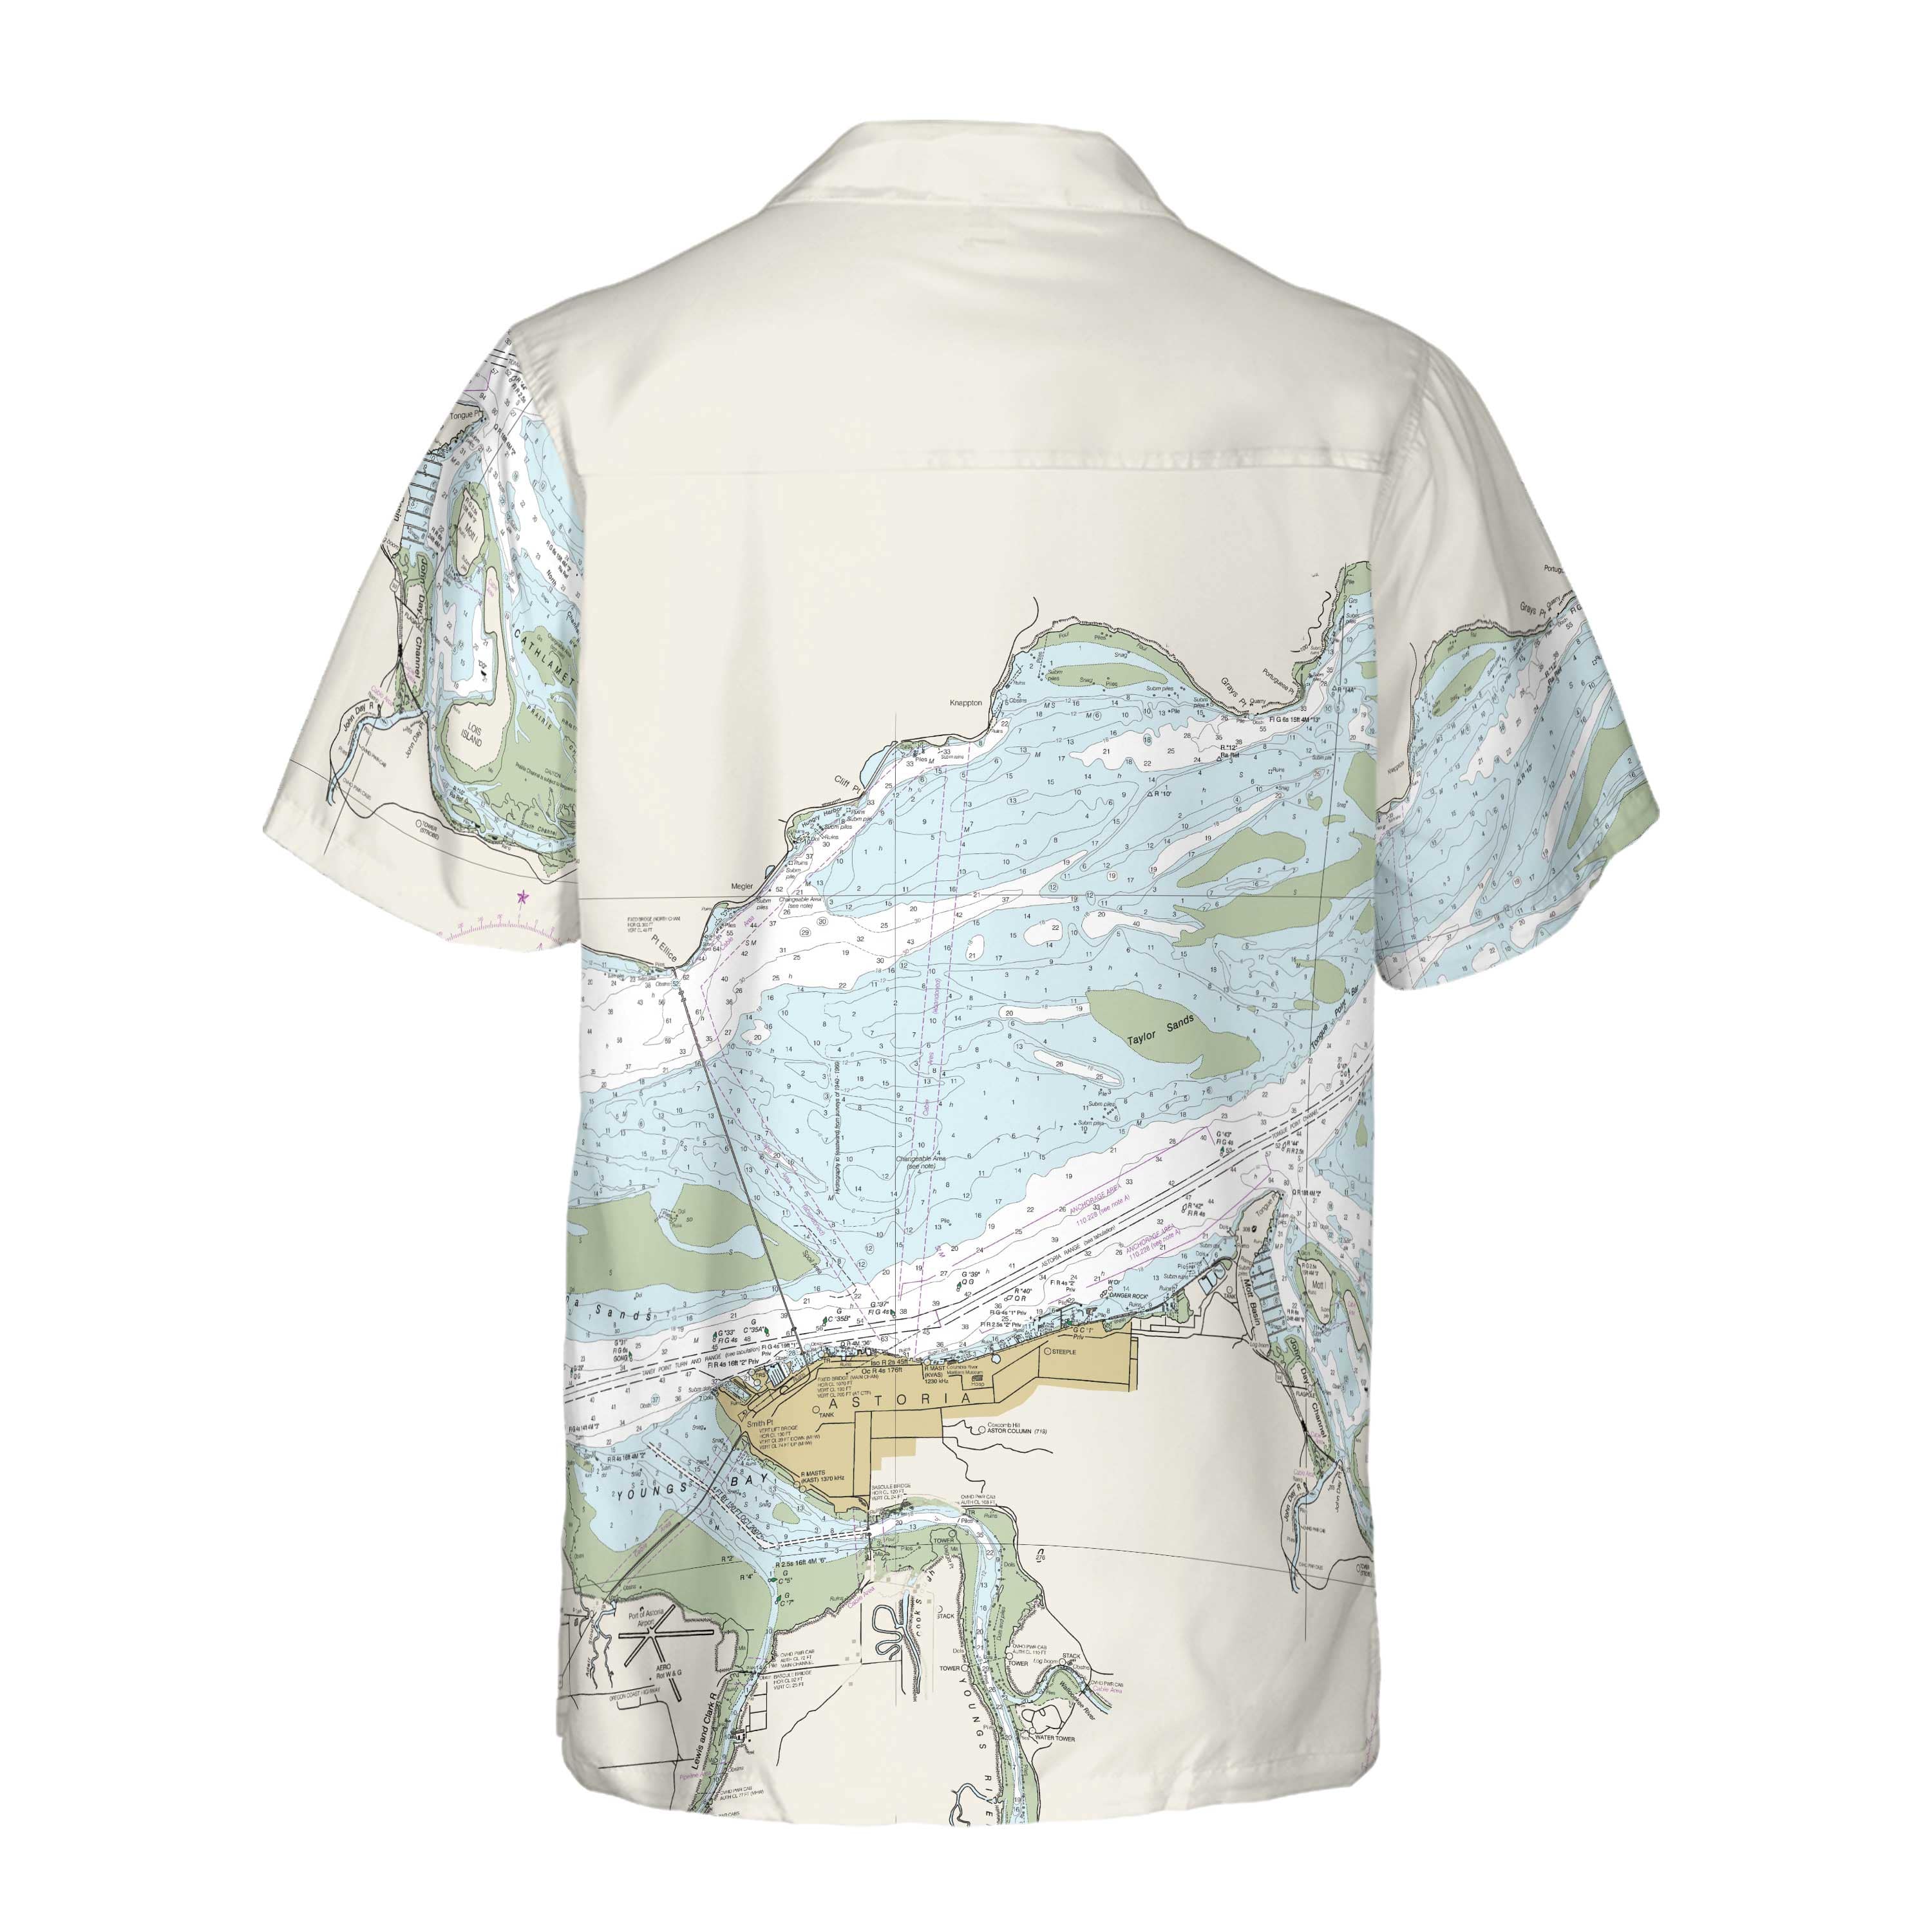 The Cape Disappointment Coconut Button Camp Shirt